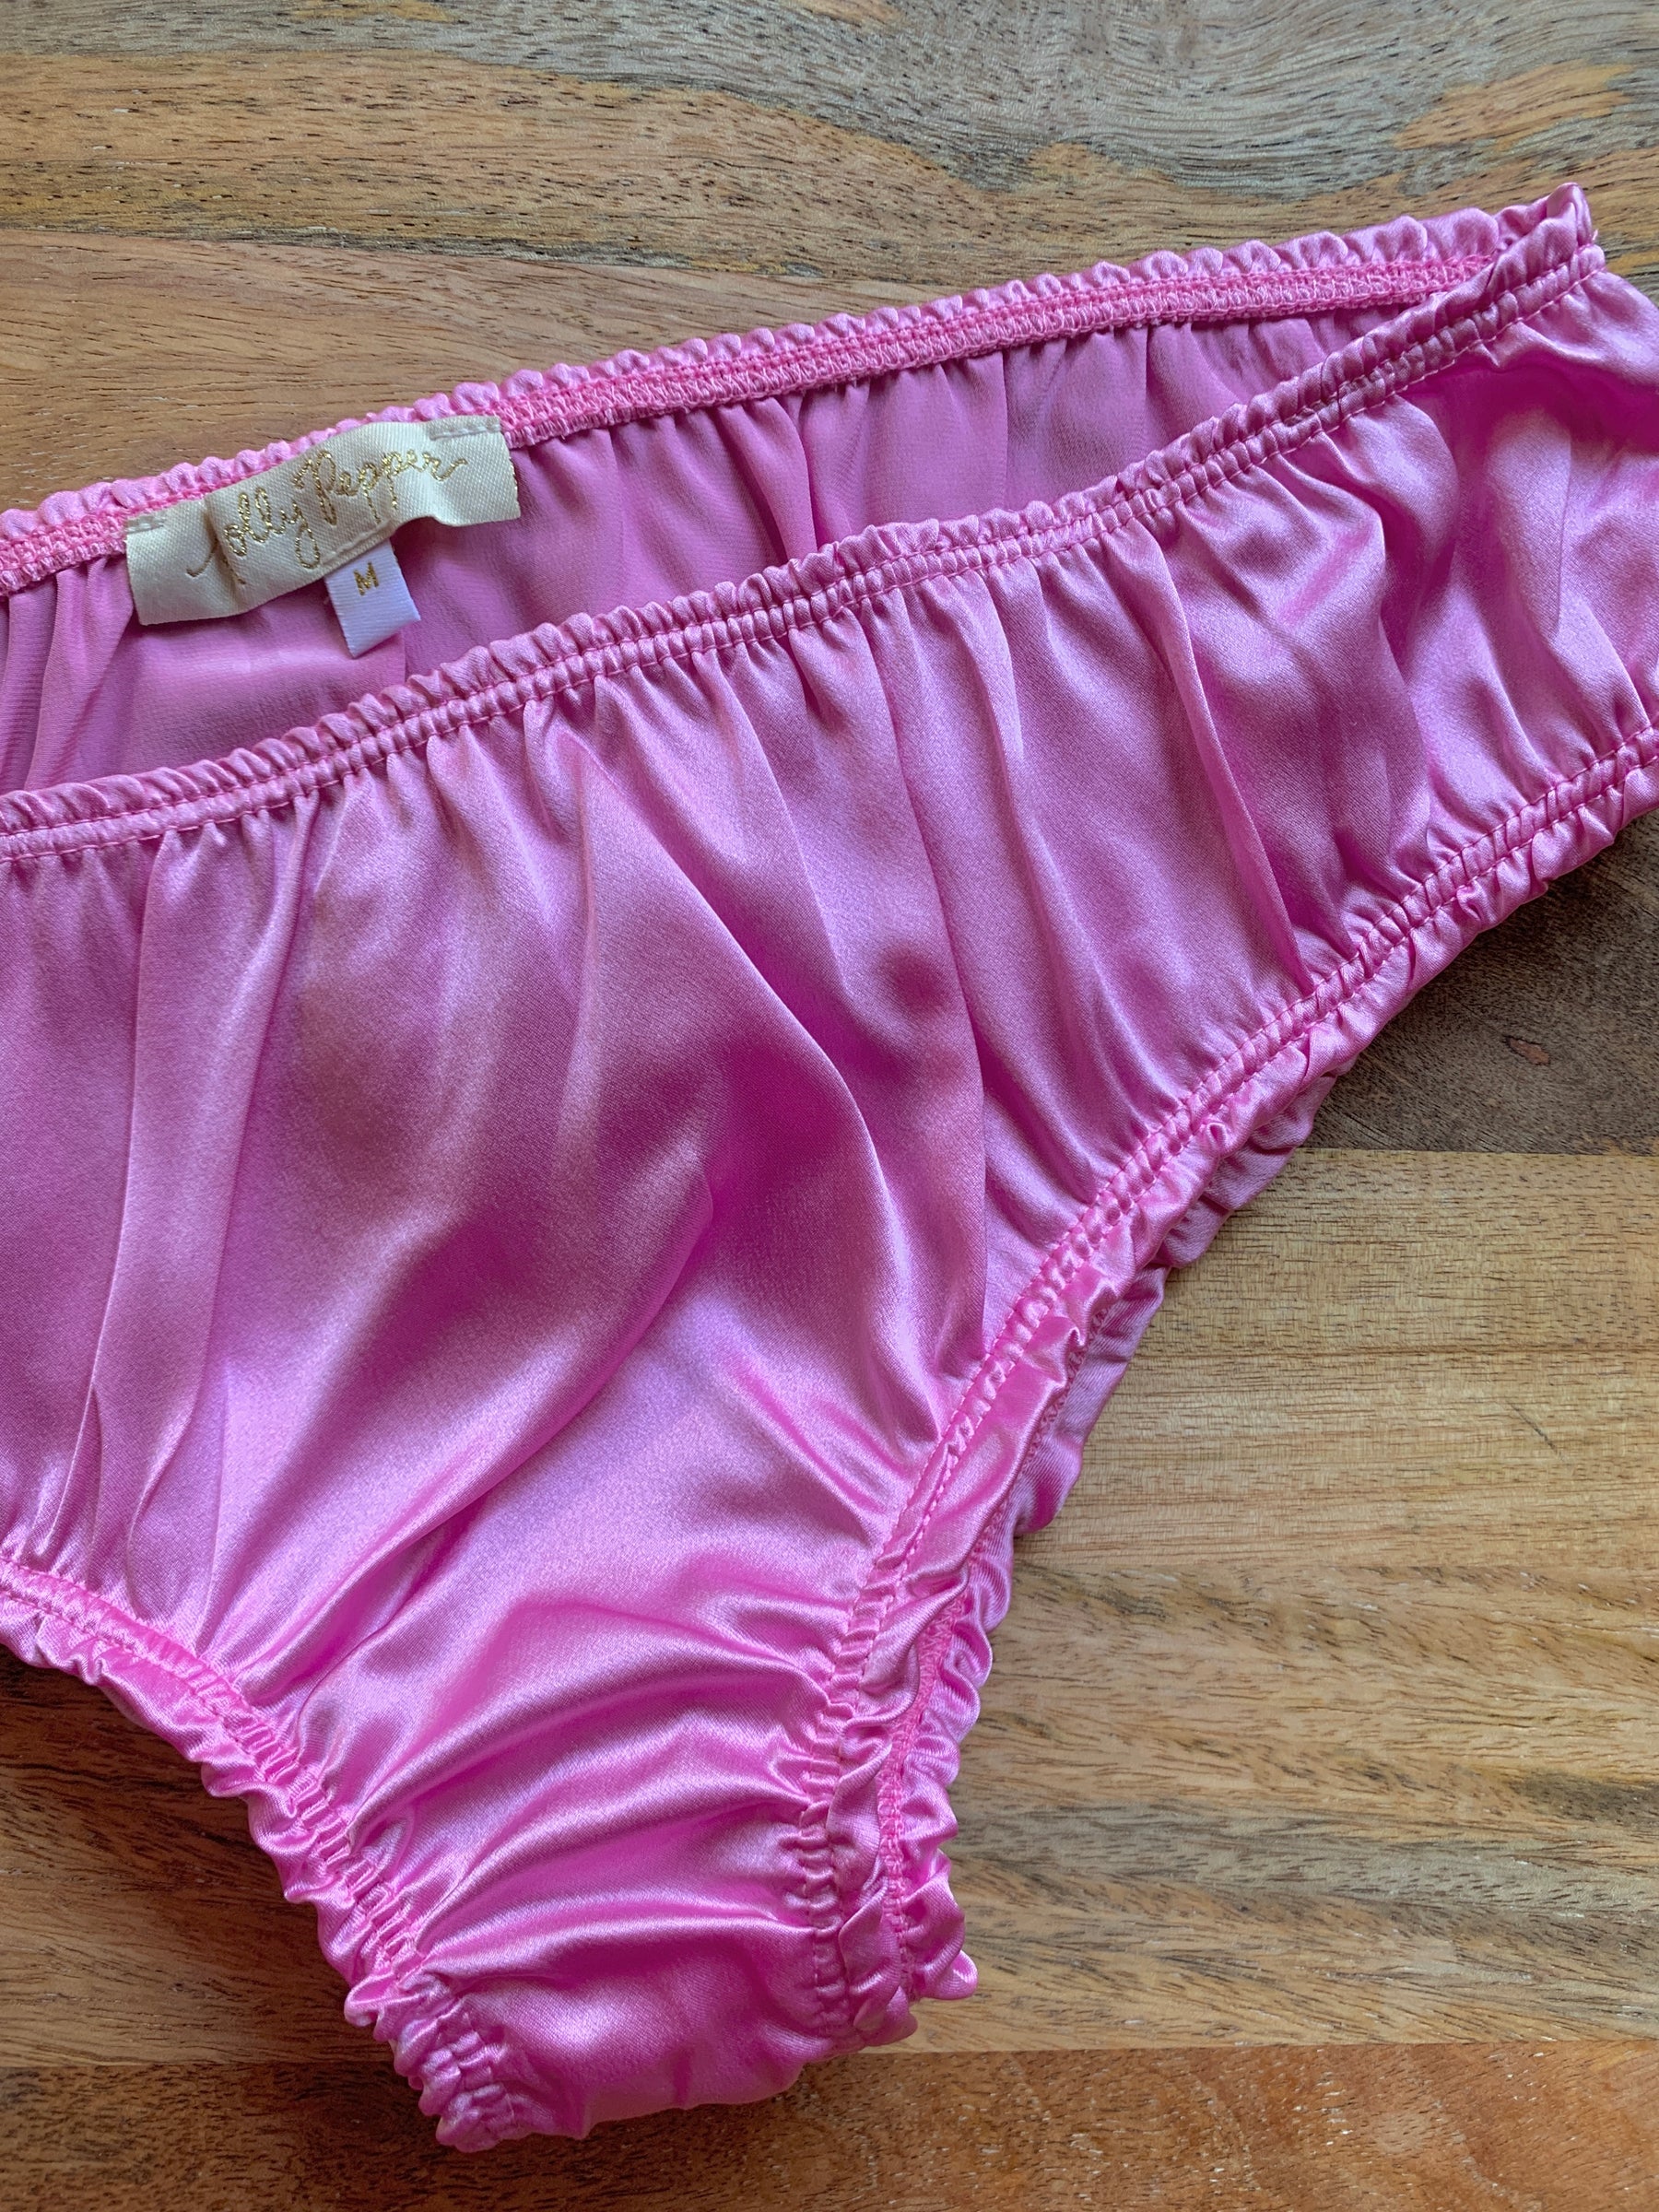 Used Panties for Sale: Inside Dalma Rosa's Panty-Selling Empire